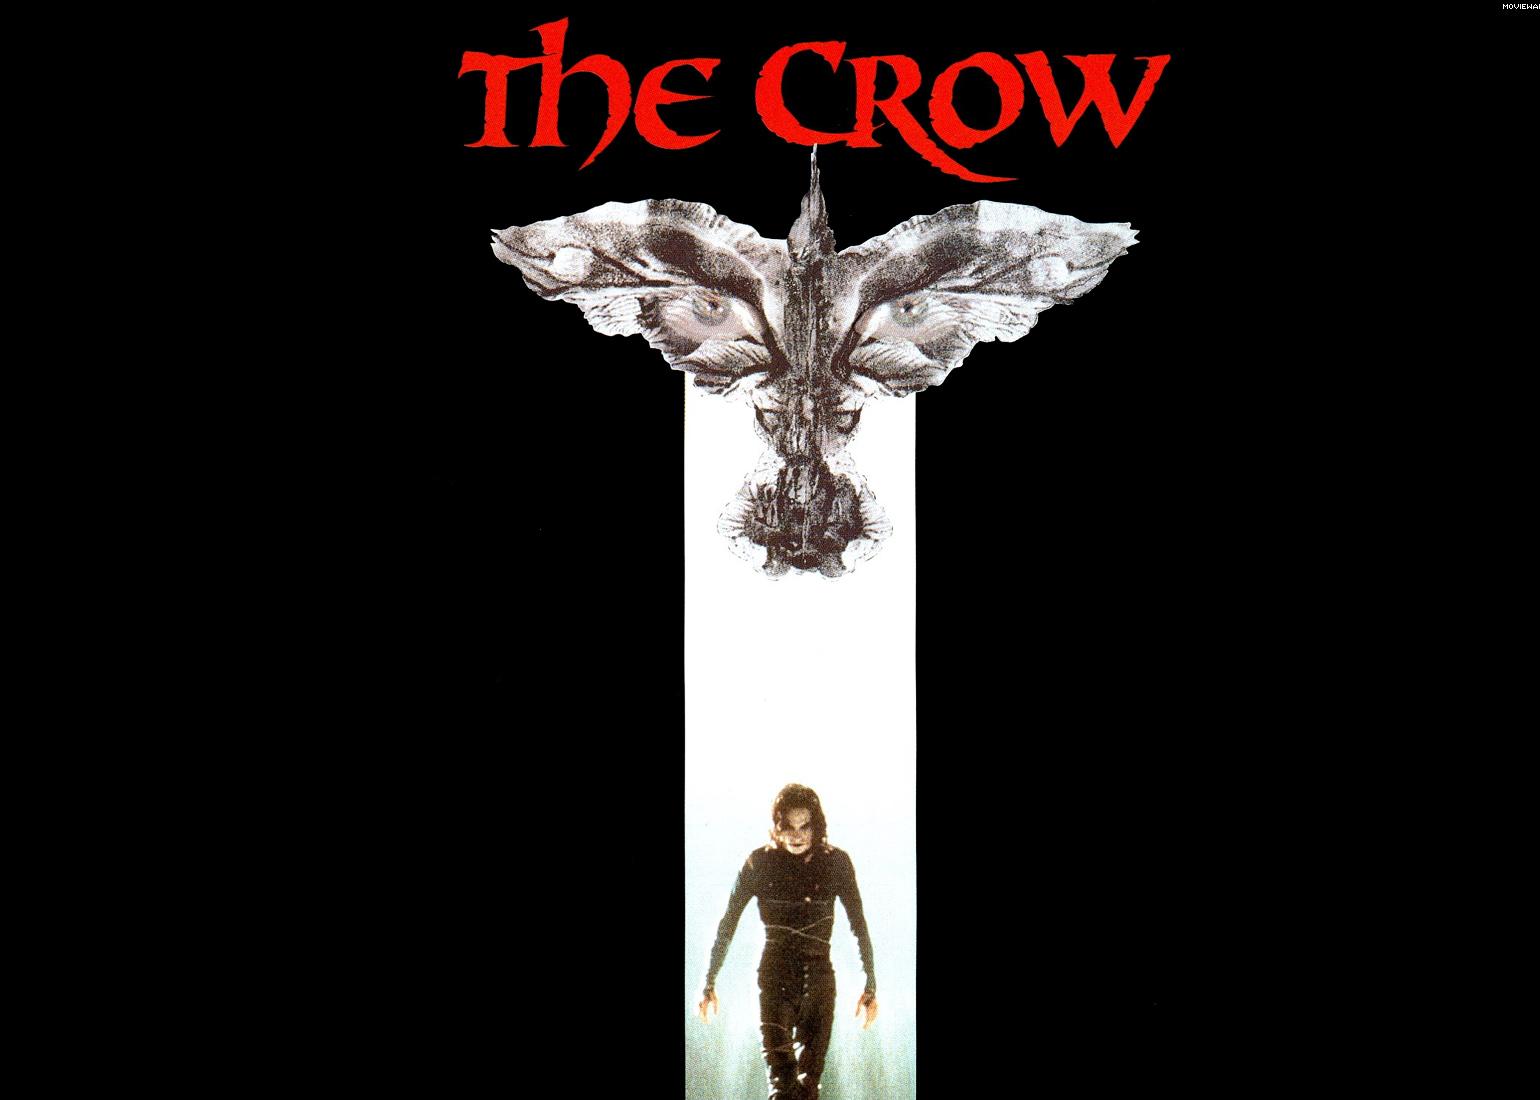 James McAvoy in The Crow